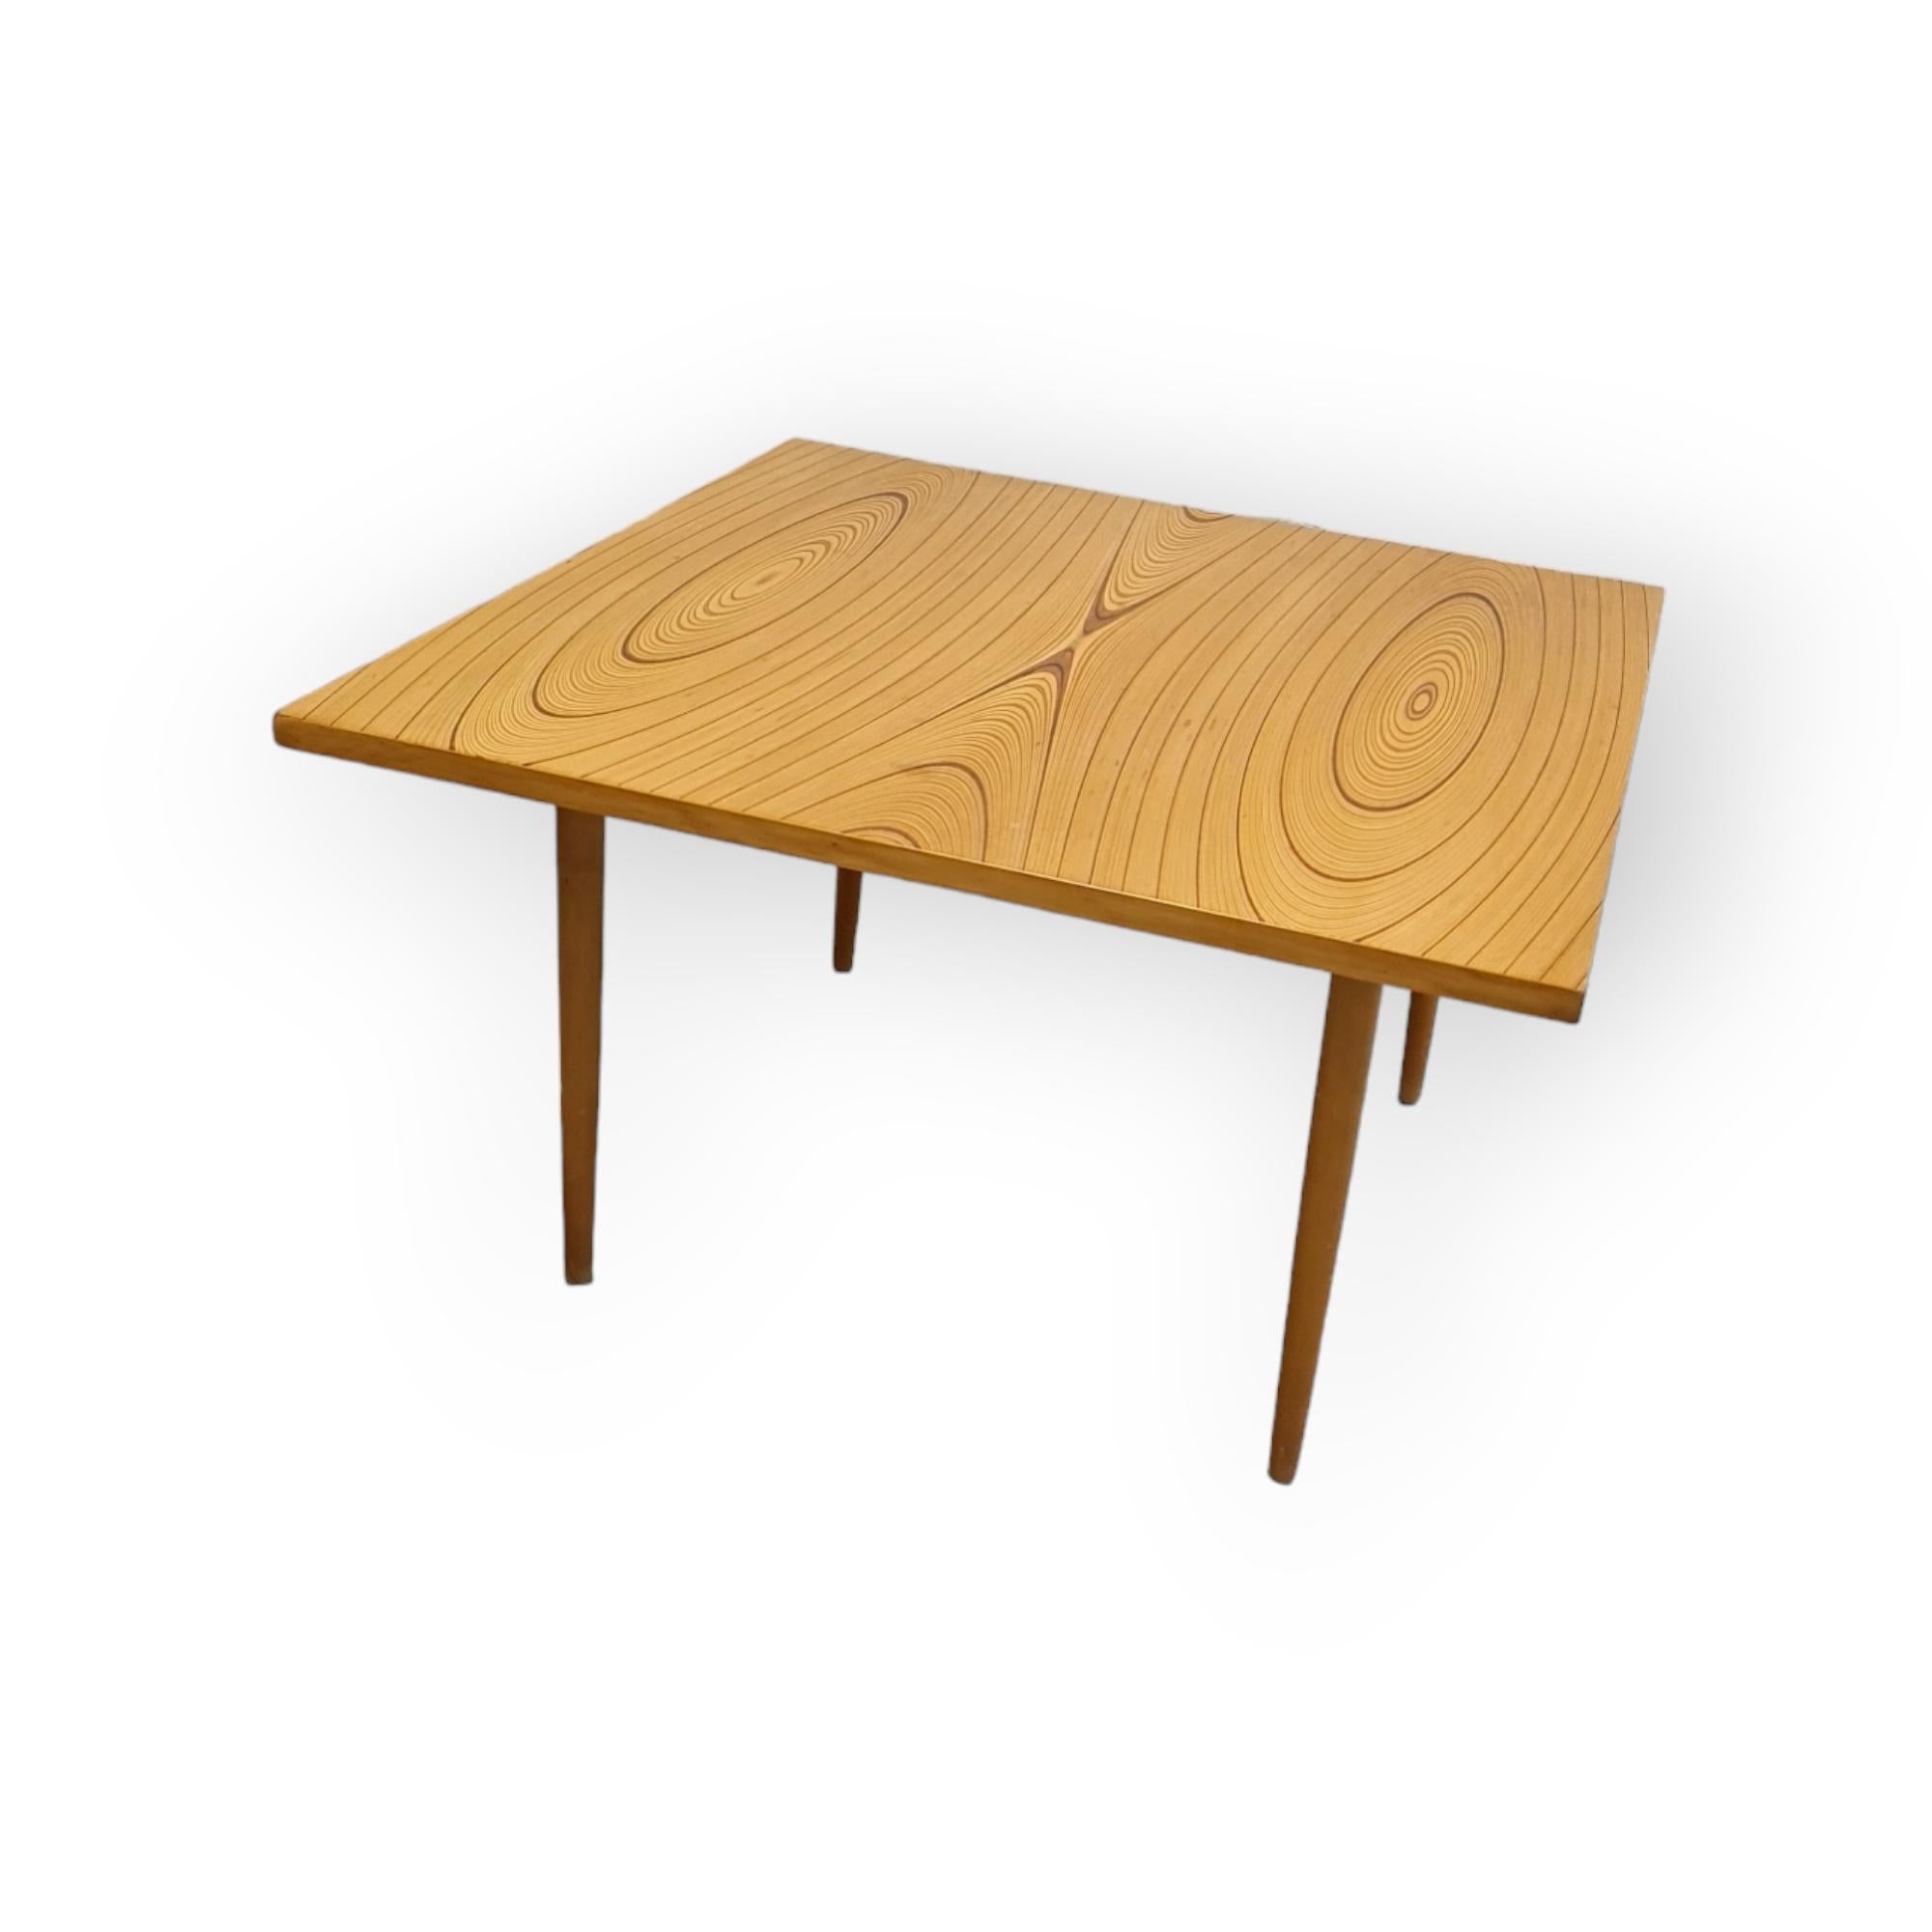 A rare version of the Tapio Wirkkala rhythmic veneer coffee table model 9018, aka Àngel Wings` due to the symmetric wing resembling rhytmic lines on top. This version is the less common wooden leg version. The legs are detachable and can be easily